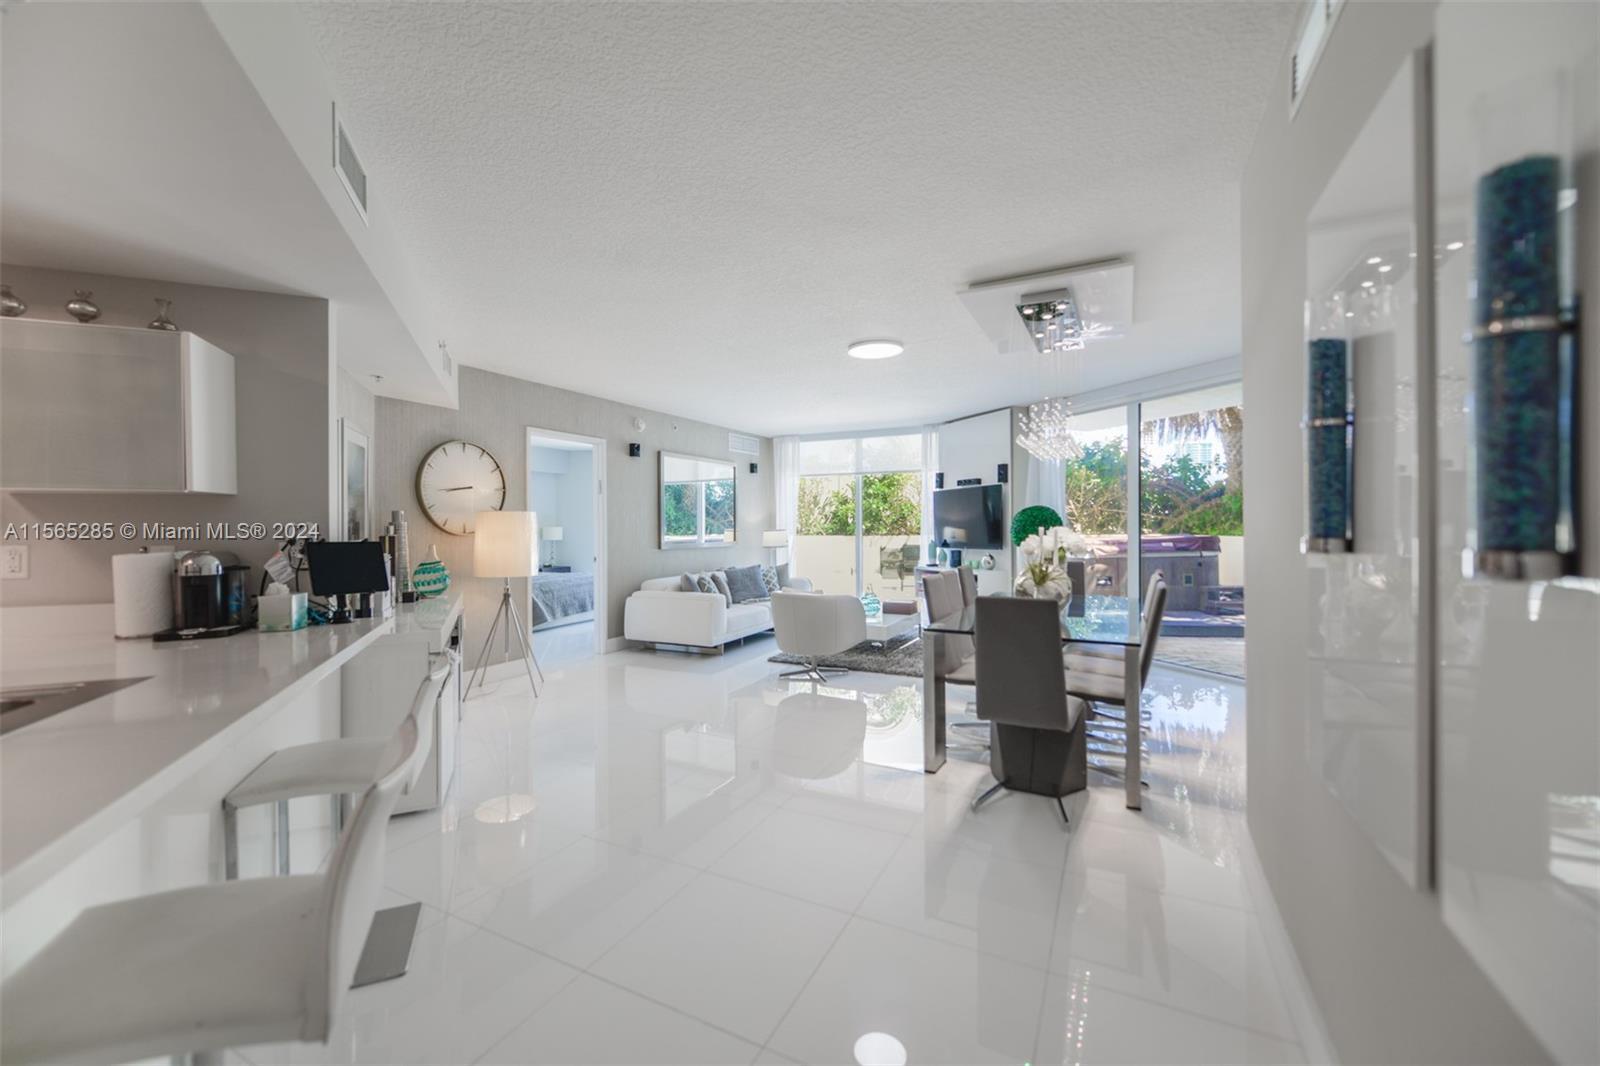 Located in heart of Sunny Isles this beautiful Model Lanai Unit, + guest suite on site. St. Tropez i